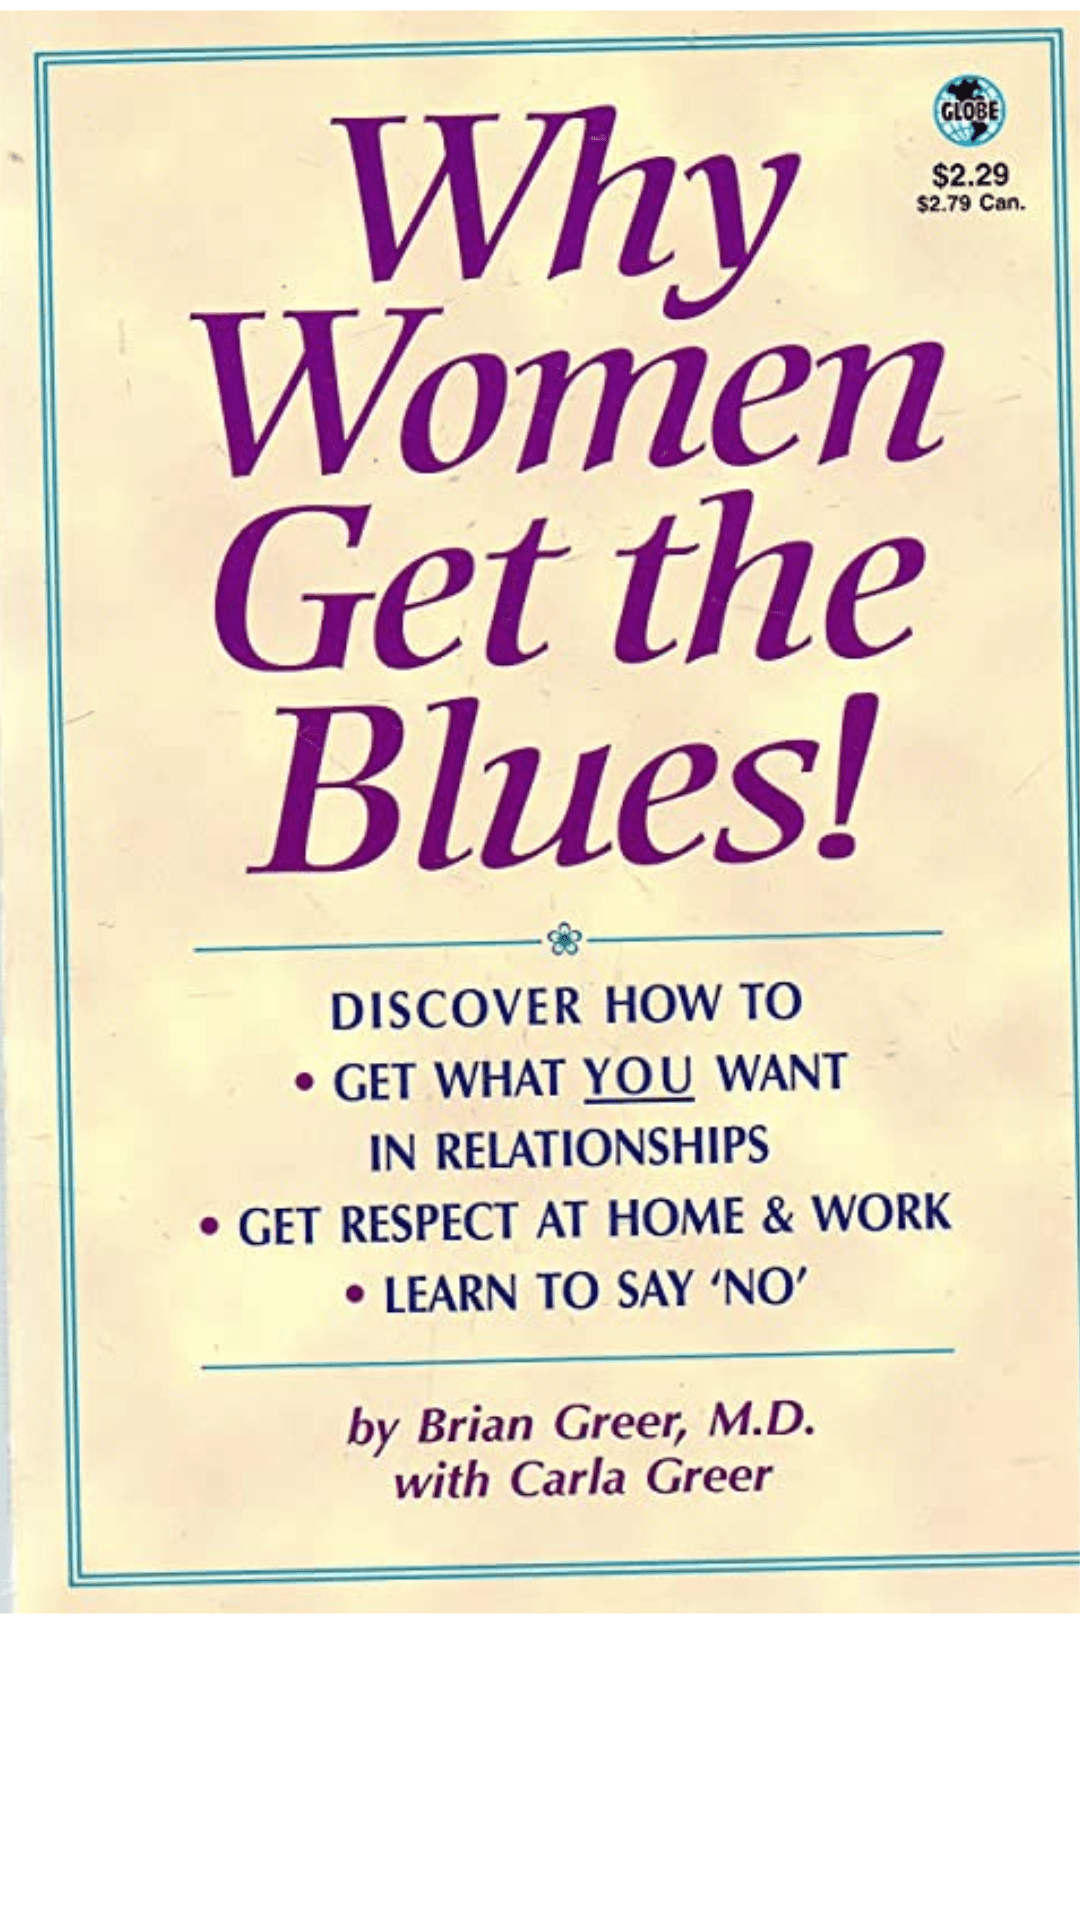 Why women get the blues